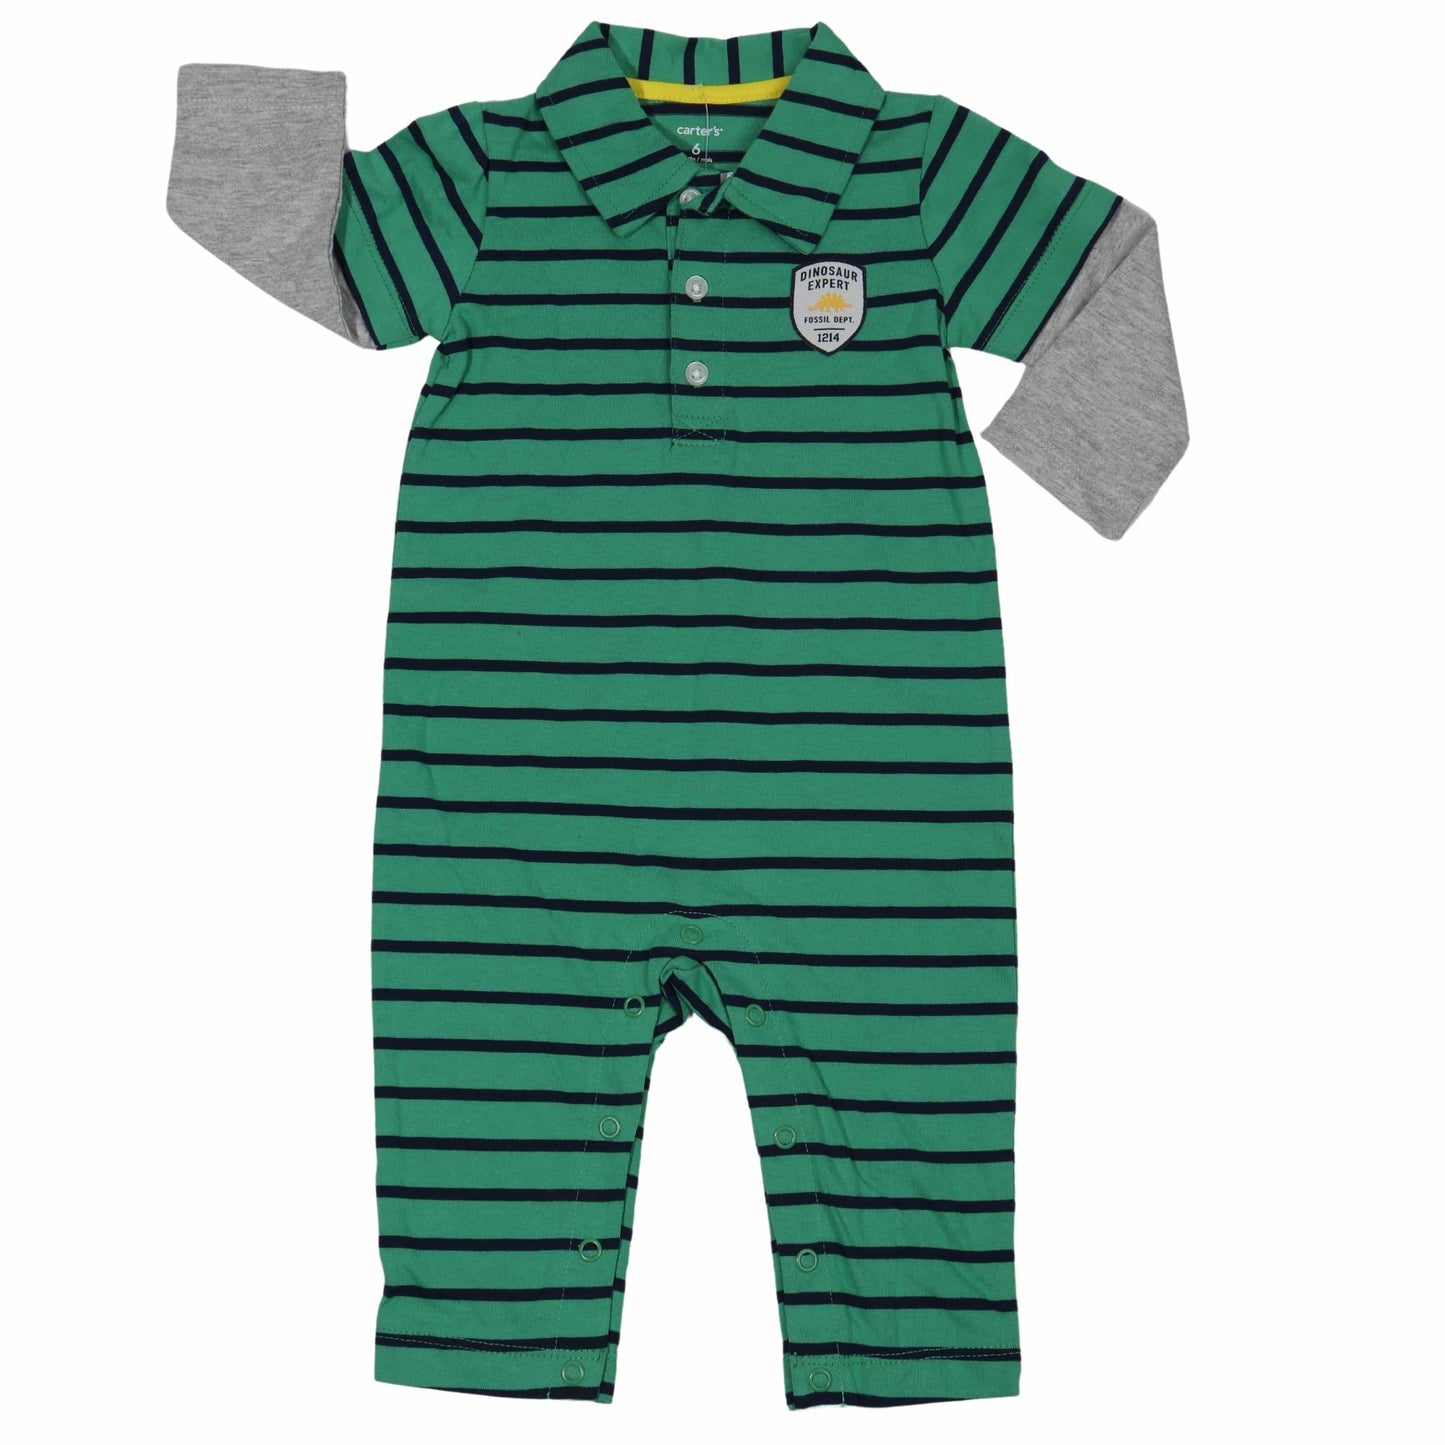 CARTER'S Baby Boy 6 Month / Multi-Color CARTER'S - Baby - Dinosaur Expert 1214 Overall